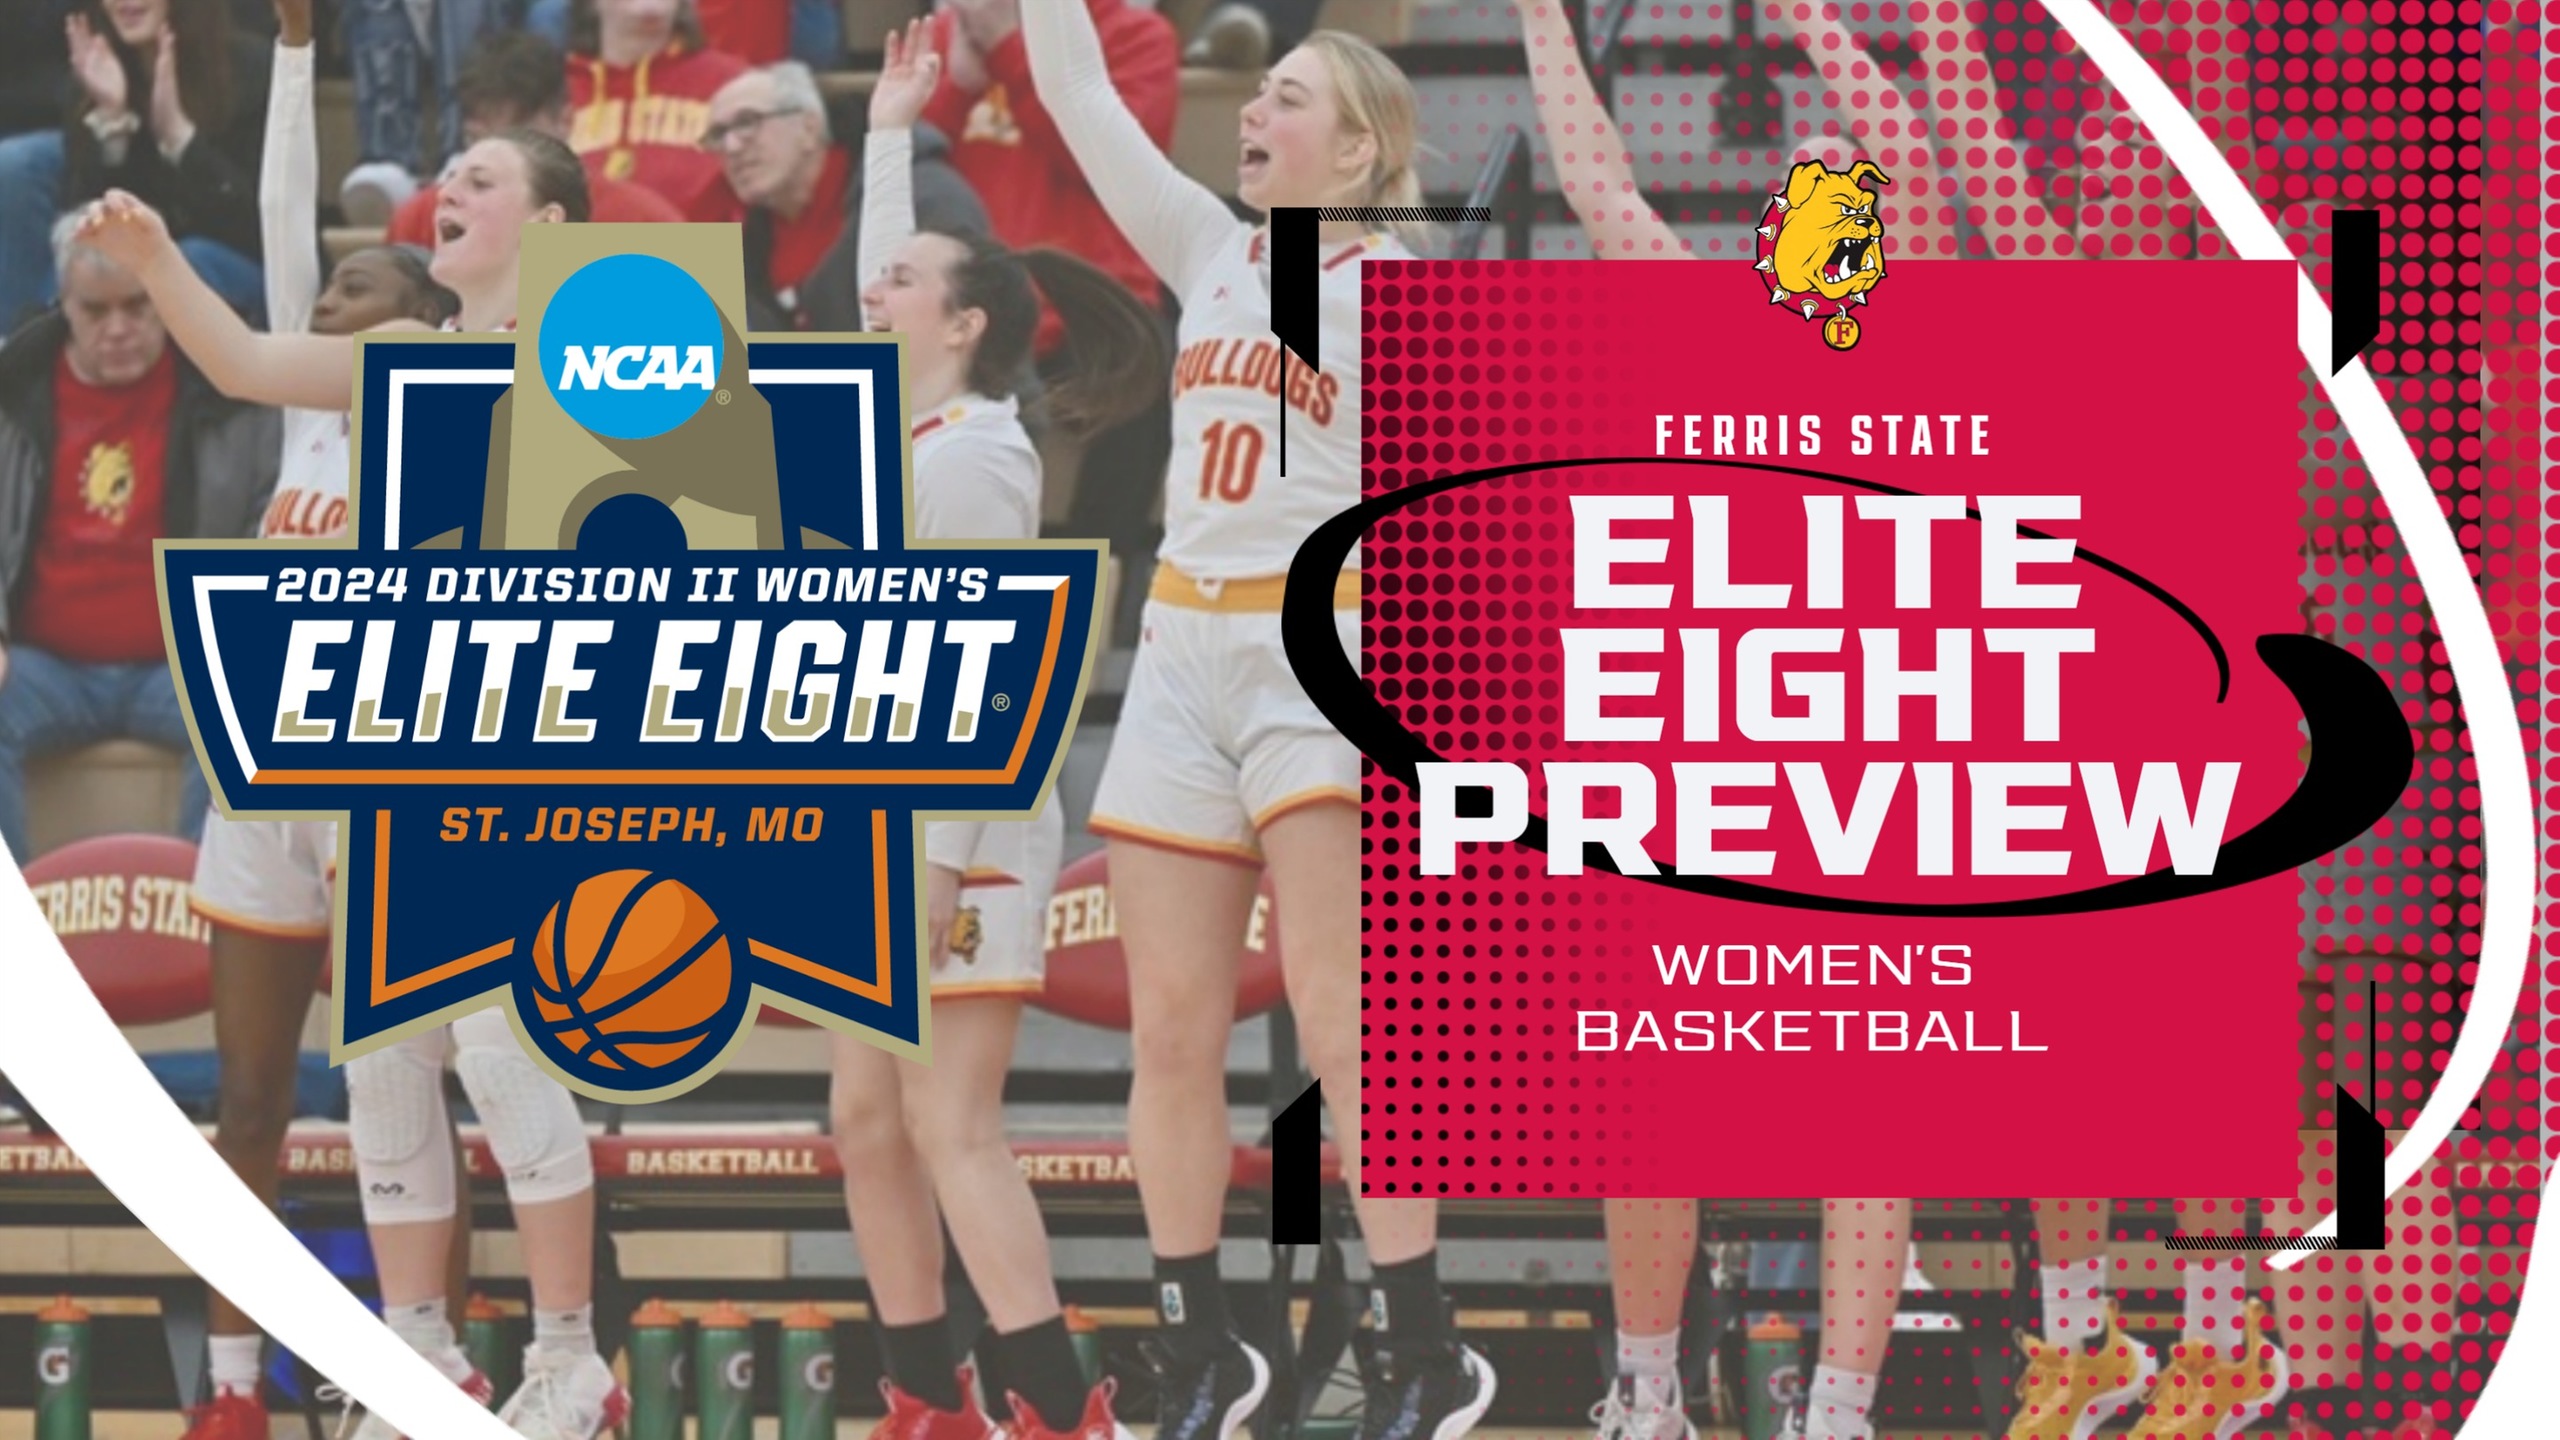 ELITE EIGHT PREVIEW: Ferris State Faces Tampa In First-Ever Women's Elite Eight Appearance